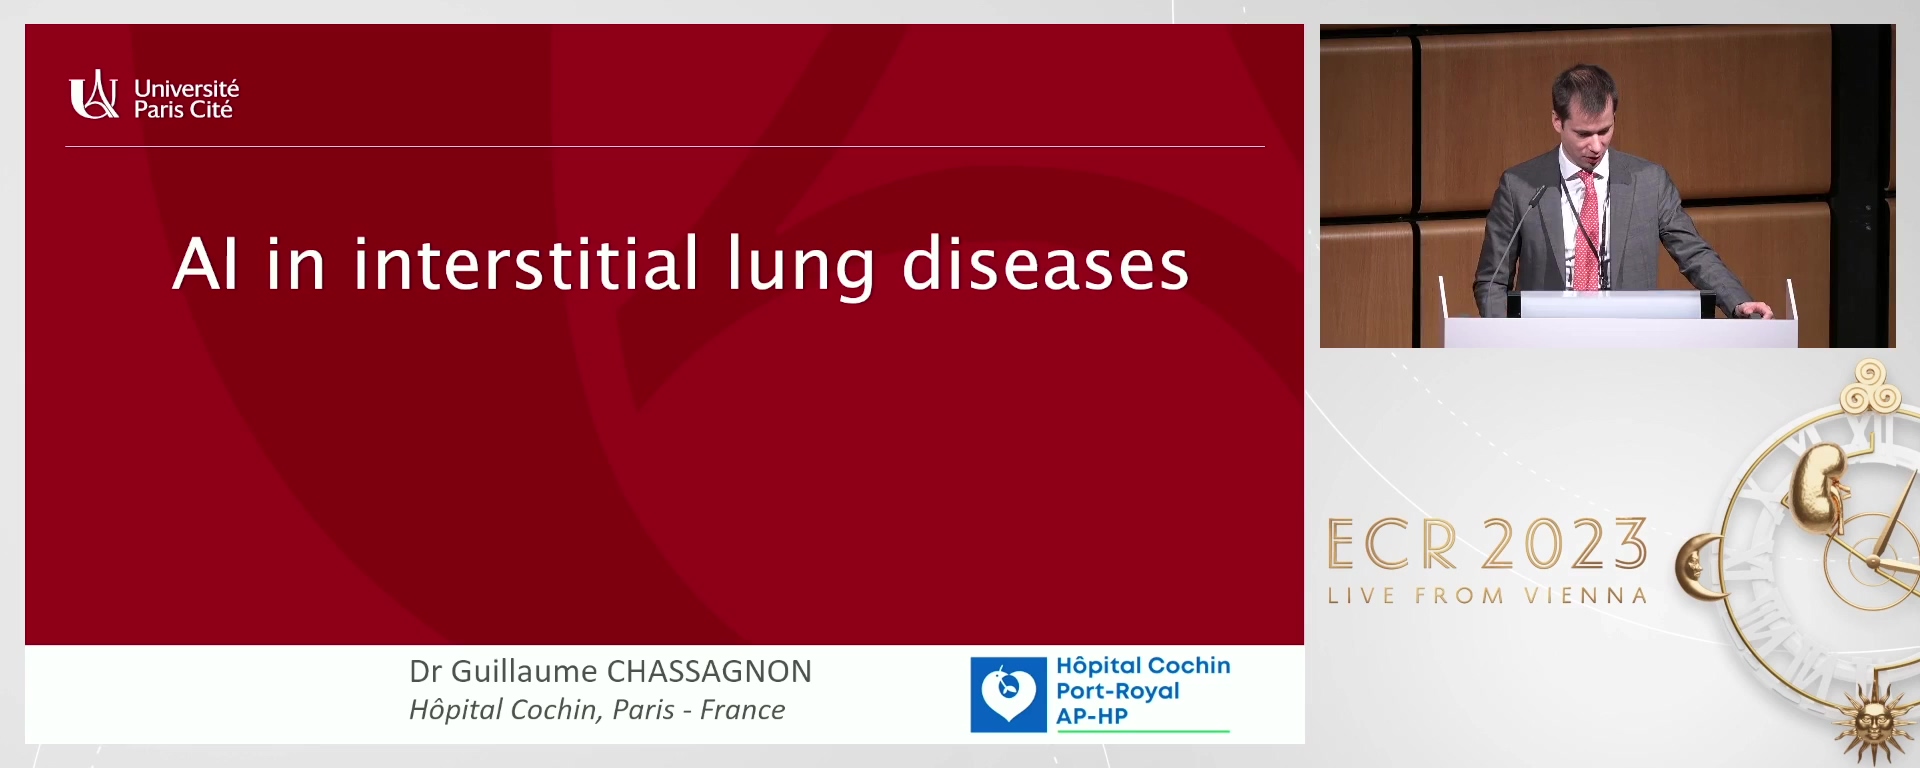 AI in interstitial lung diseases